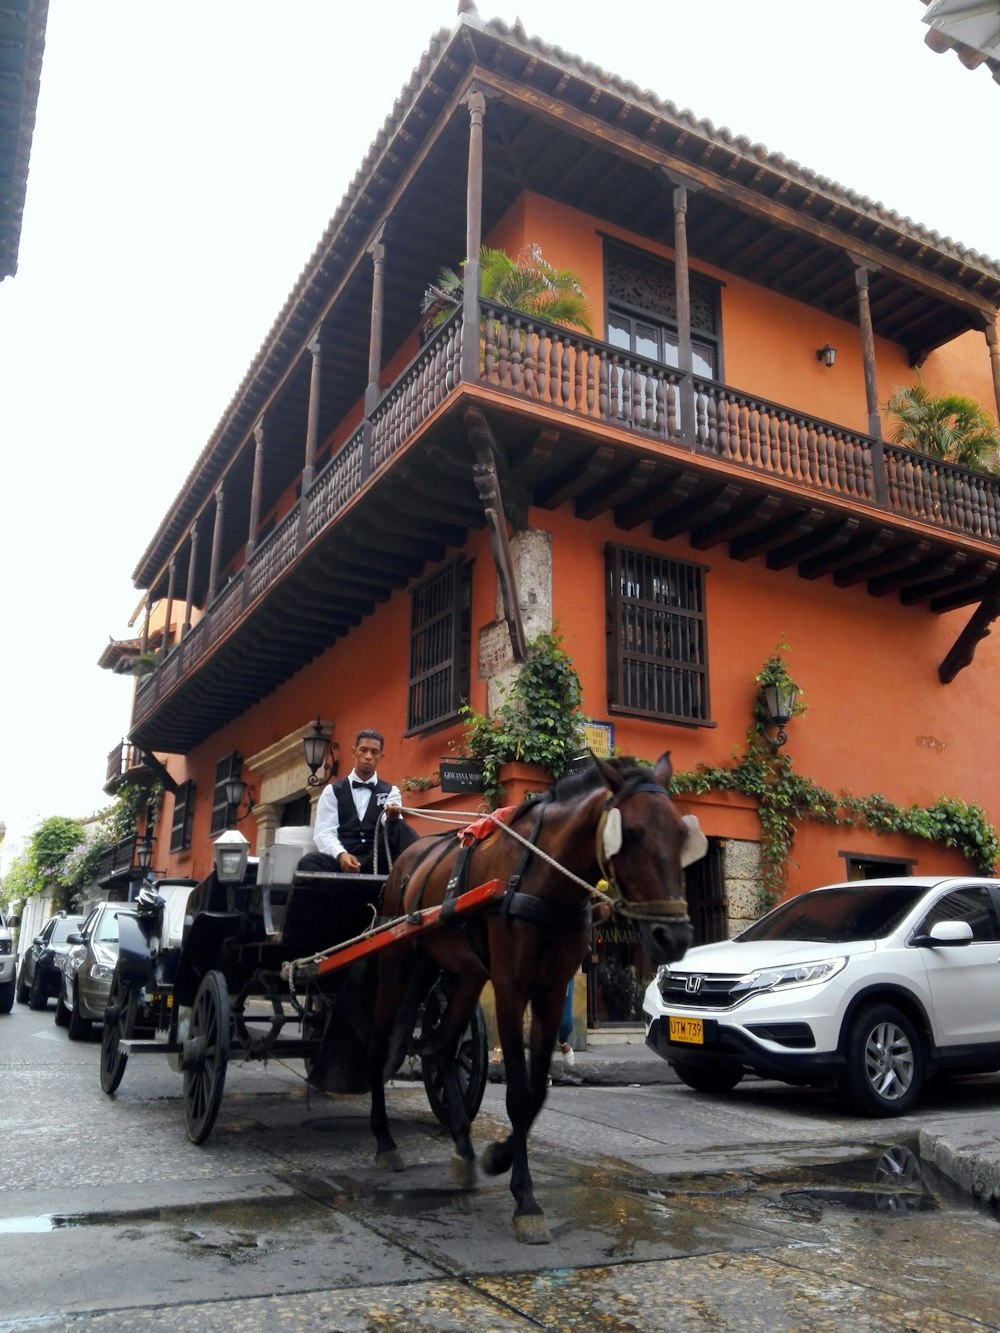 a horse drawn carriage in front of an orange building